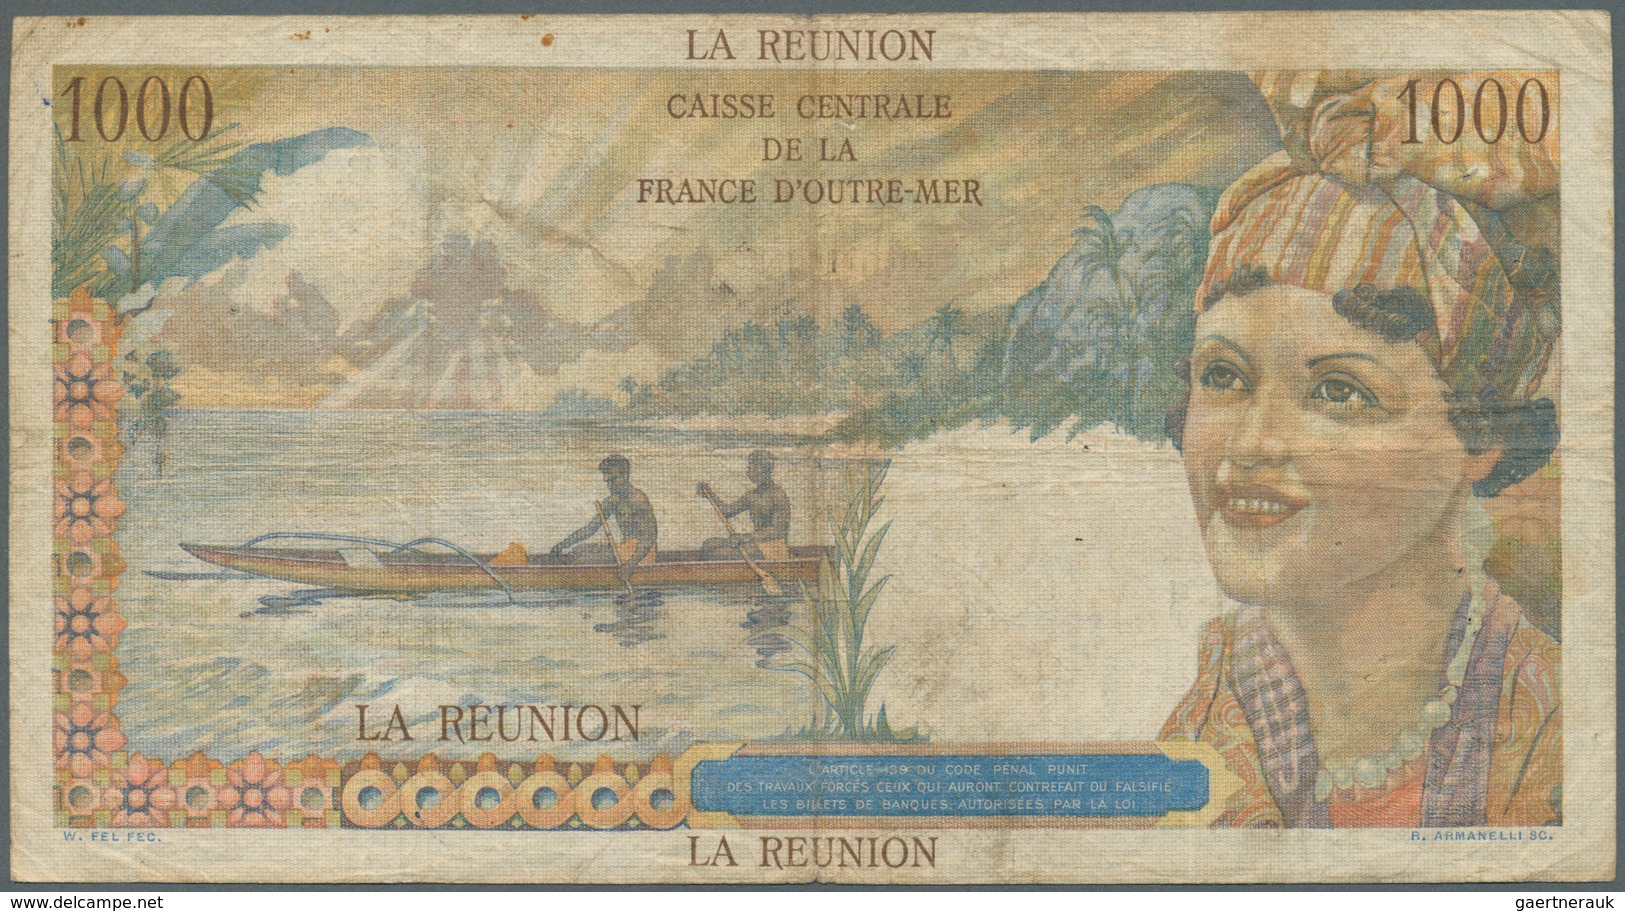 02249 Réunion: 1000 Francs ND(1947) P. 47, Used With Stronger Center Folds, Stained Paper, A Few Pinholes - Reunion